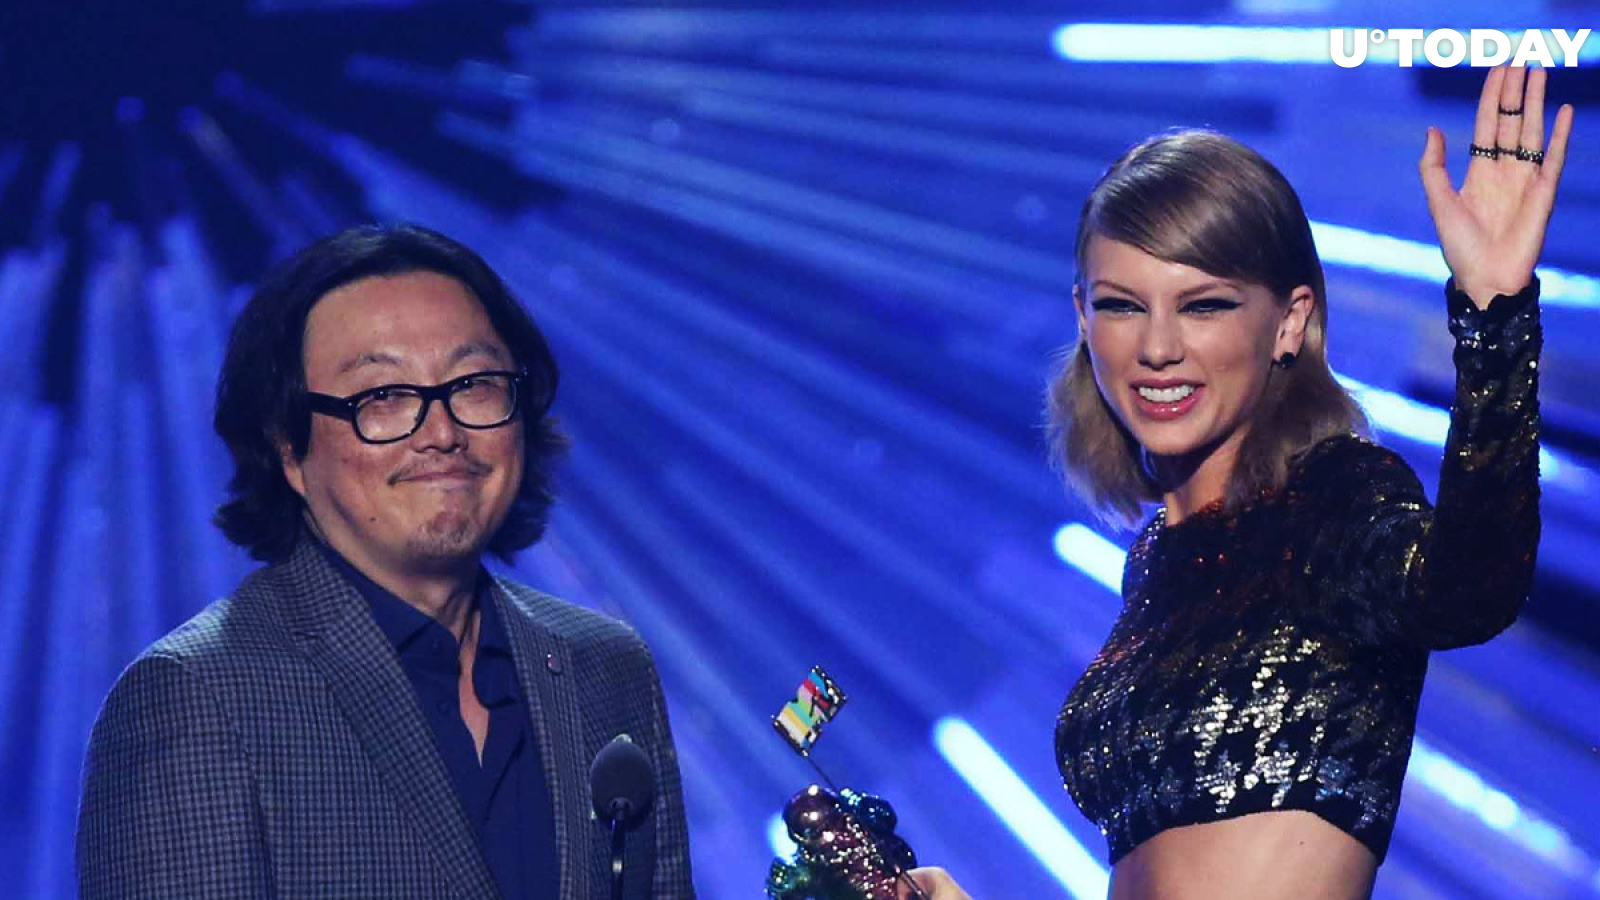 Taylor Swift's Video Director Turns Into Bitcoin Trader. Here's How It Went